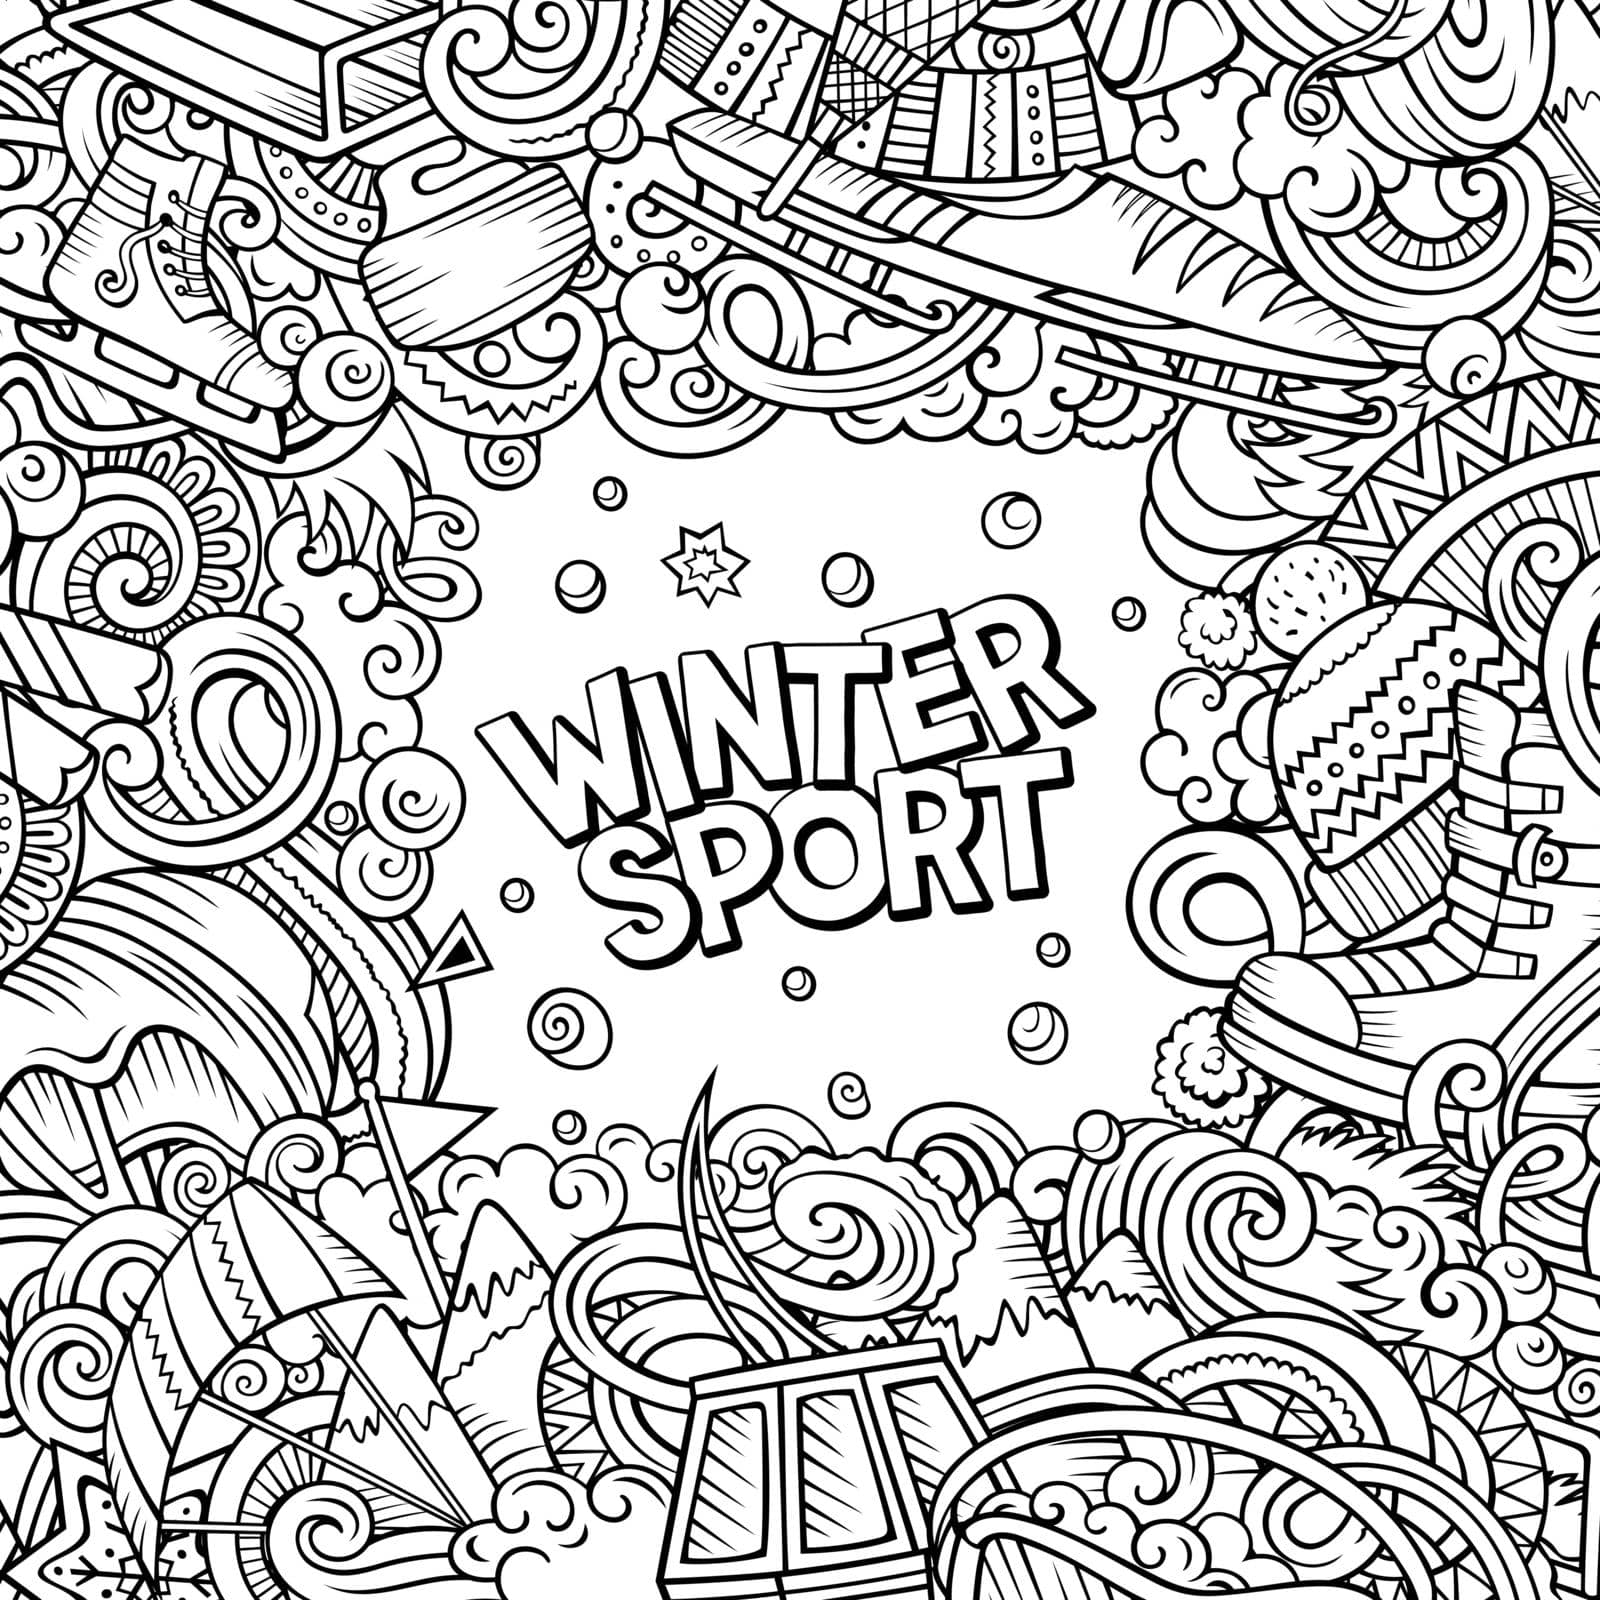 Winter sports hand drawn vector doodles illustration. Ski resort frame card design. Cold season outdoor activities elements and objects cartoon background. Line art funny border